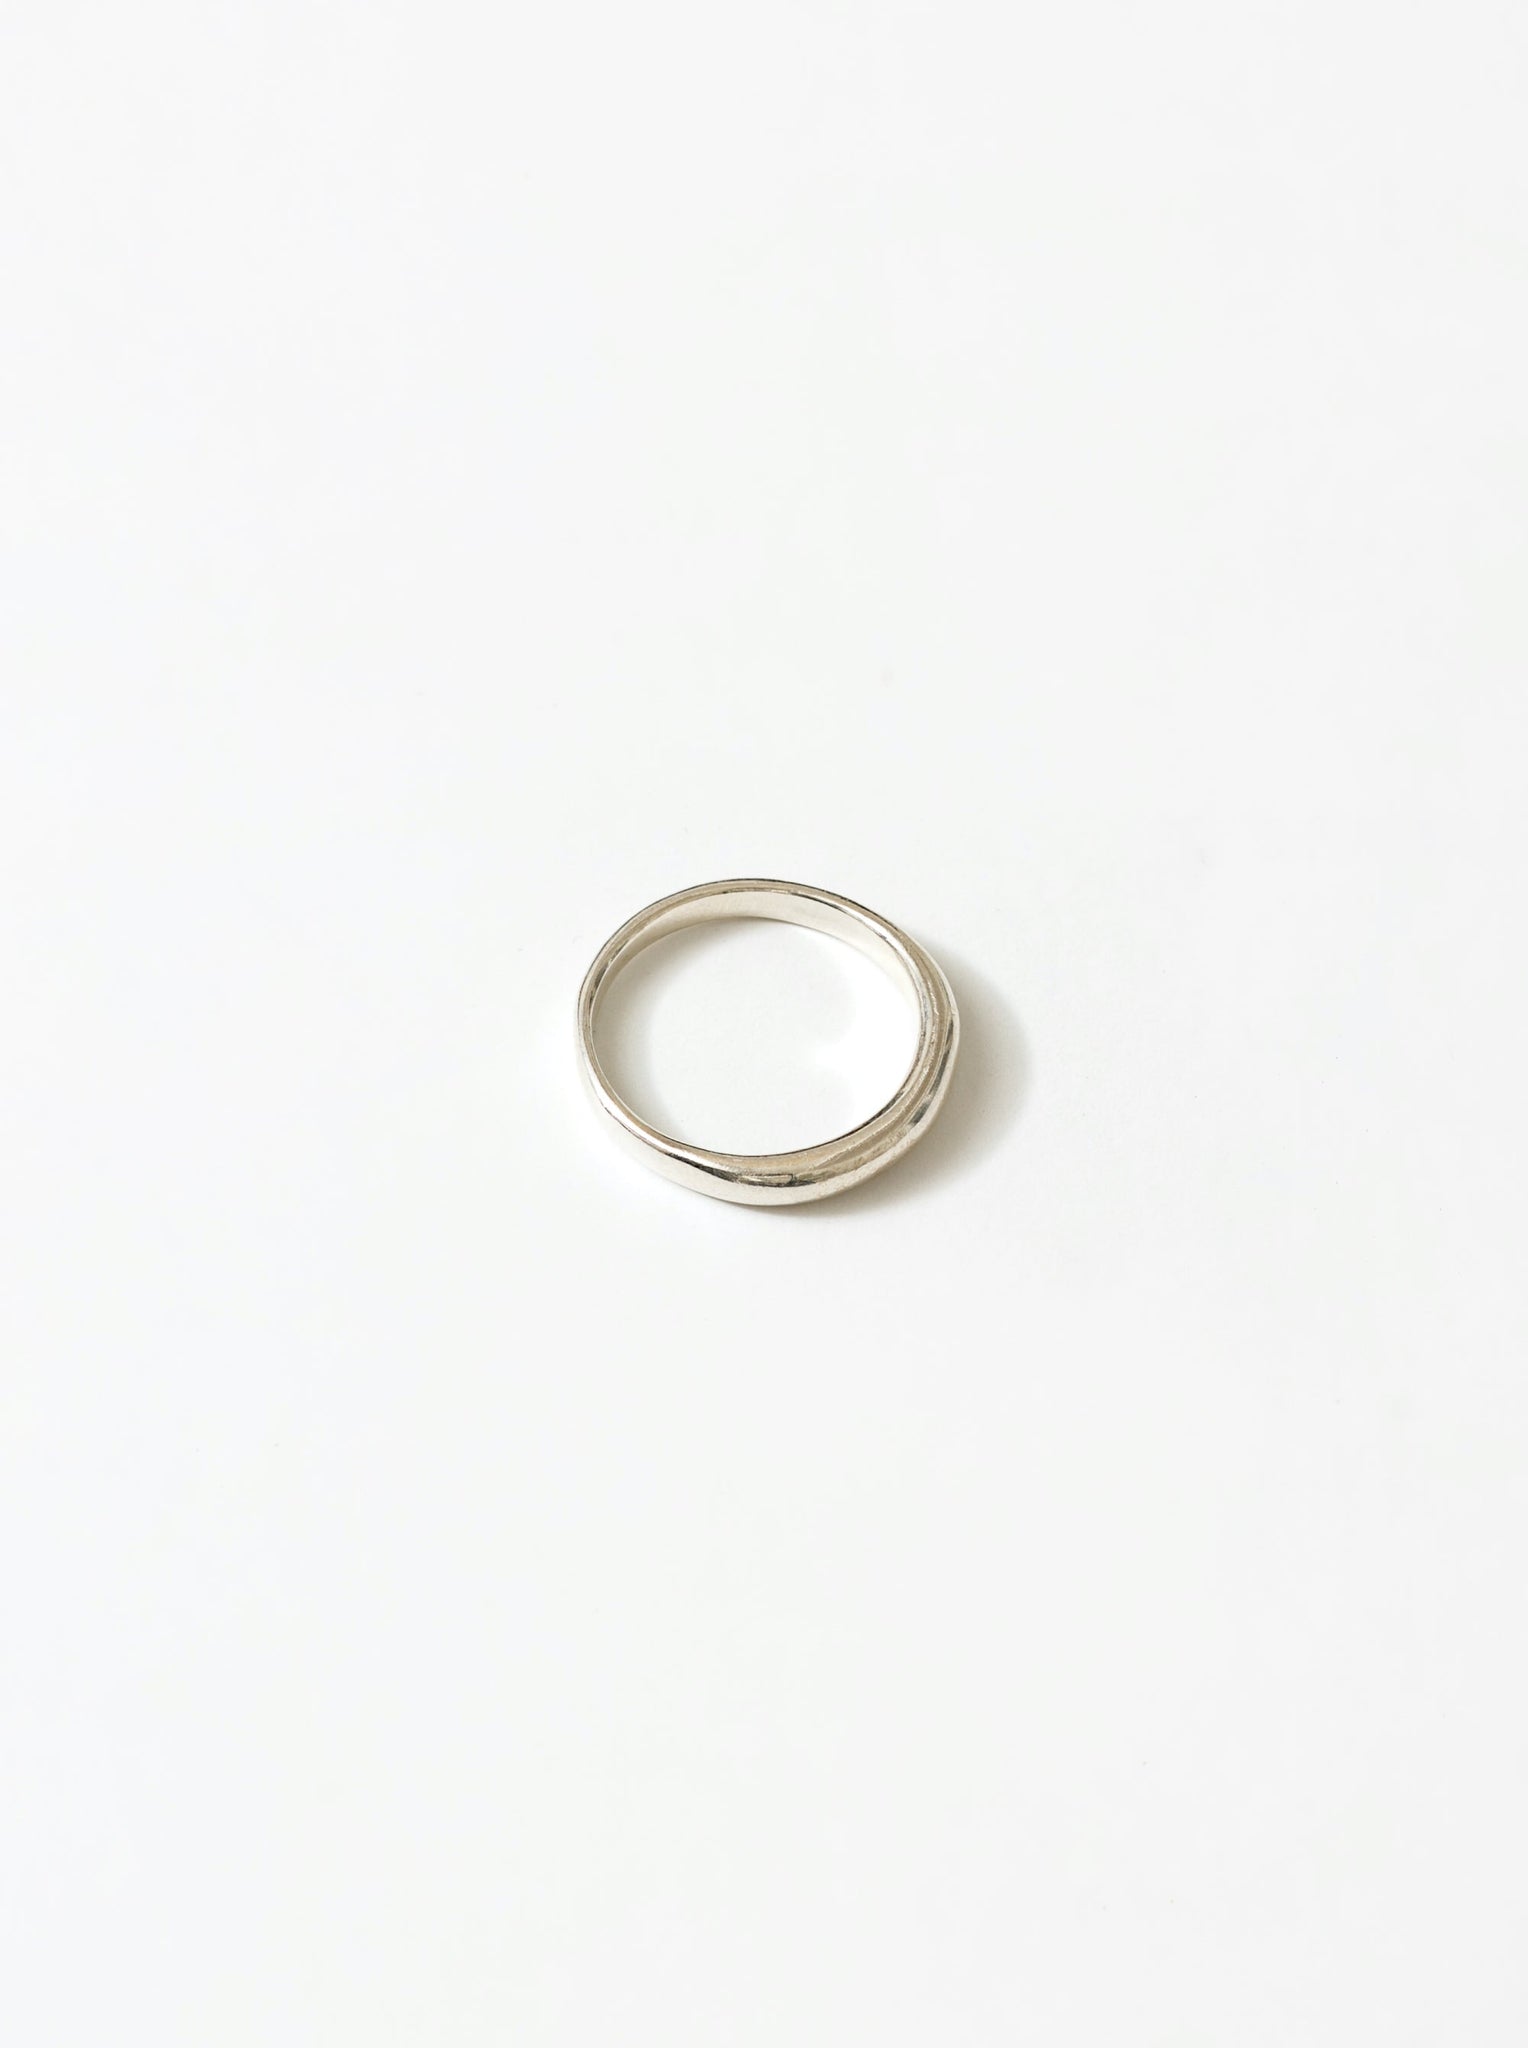 Emeile Ring in Silver